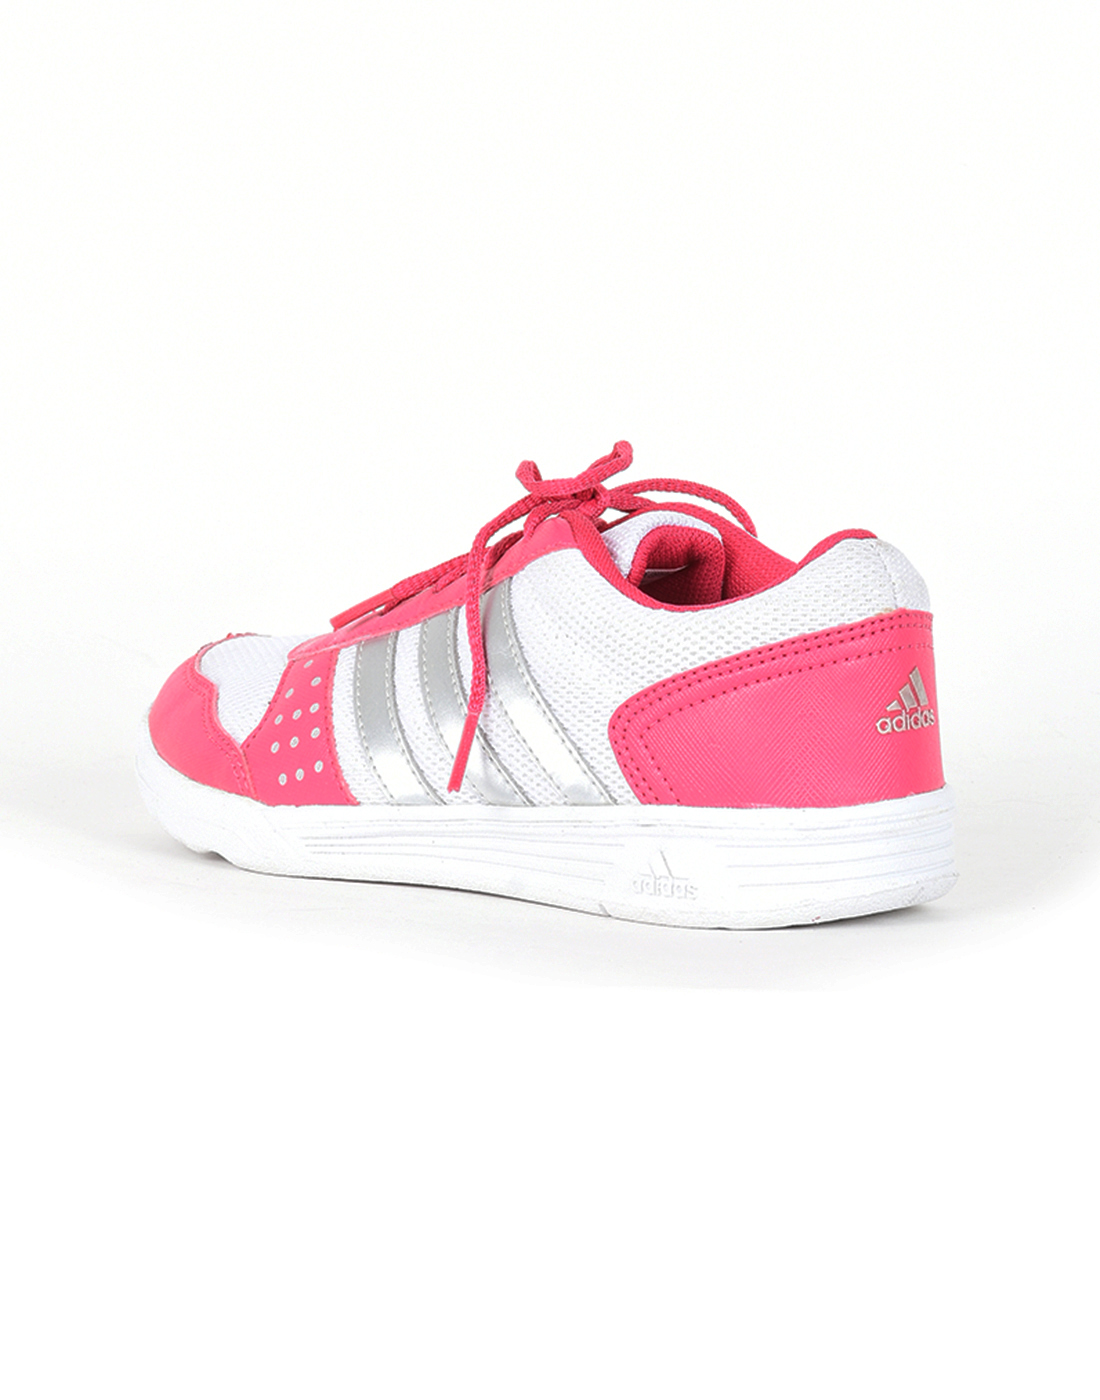 Adidas Girls Pink Sports Shoes